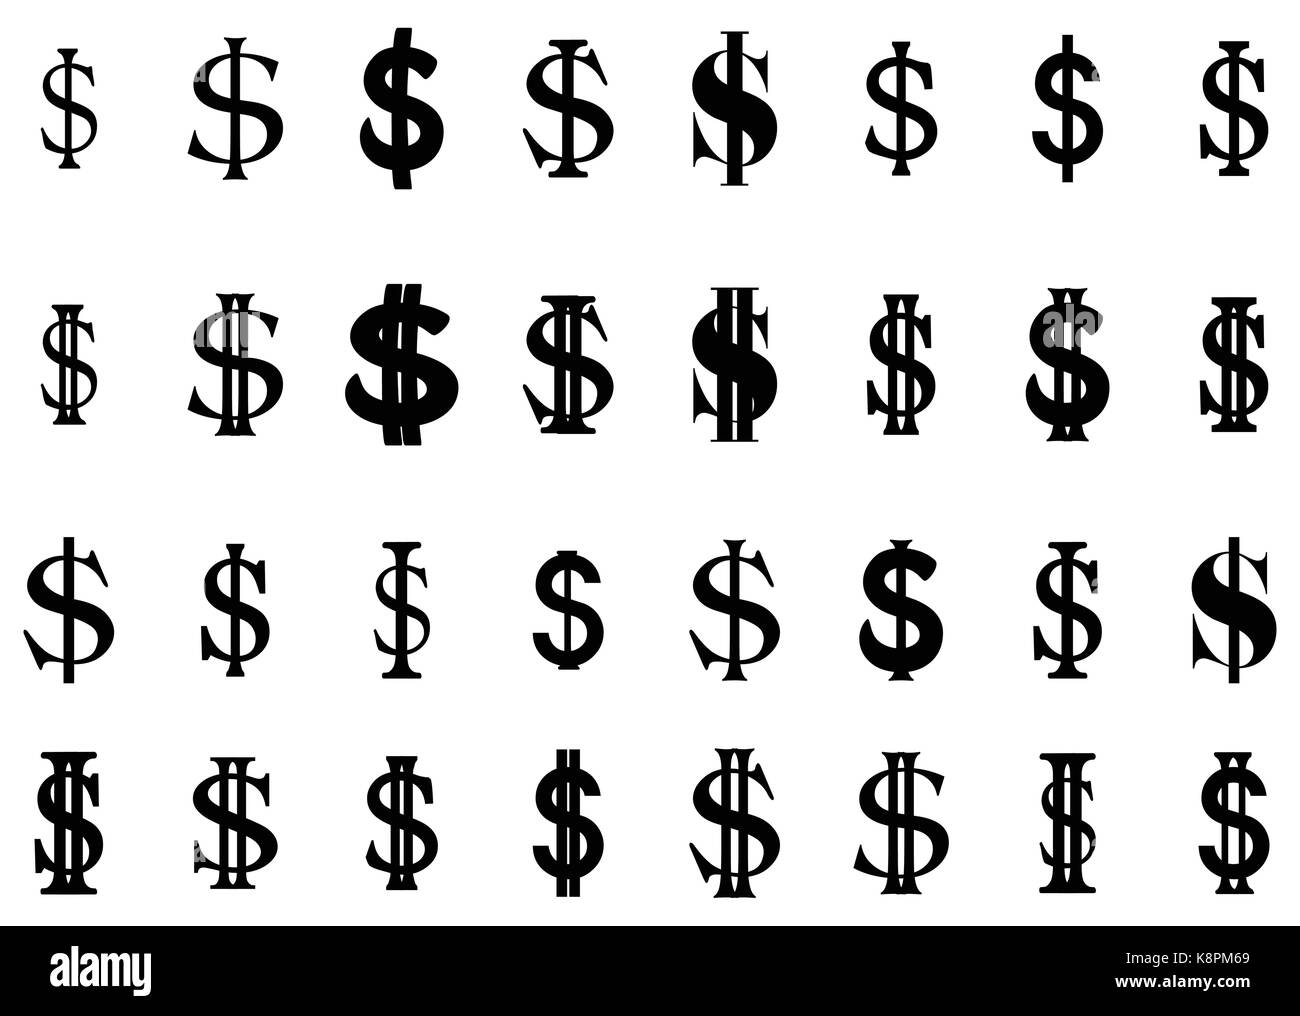 Set of flat simple us dollar sign set.  silhouette vector illustration isolate on white background Stock Vector